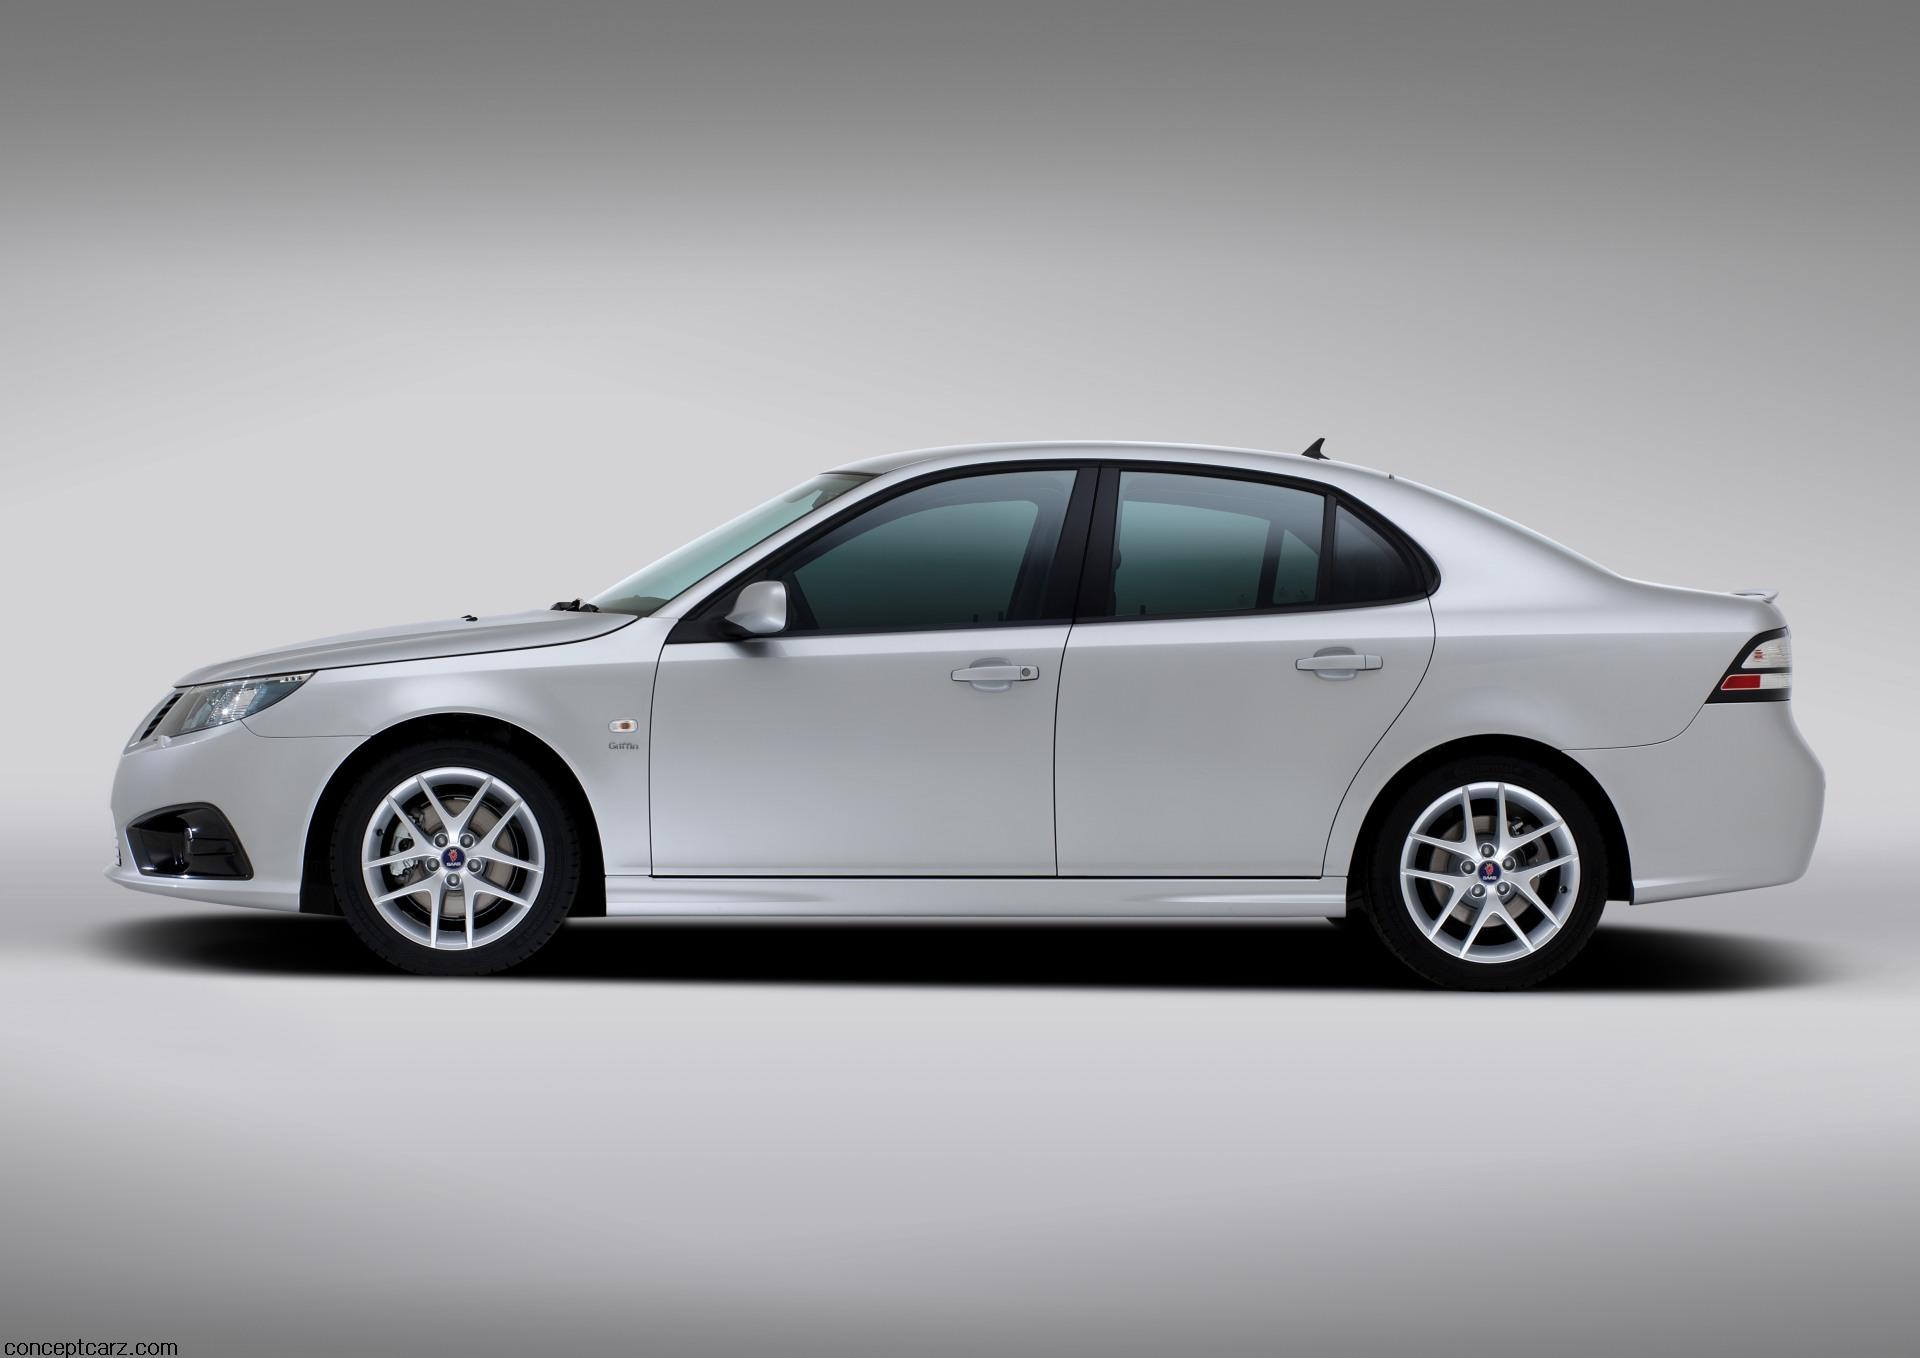 2011 Saab 9-3 Griffin News and Information - conceptcarz.com